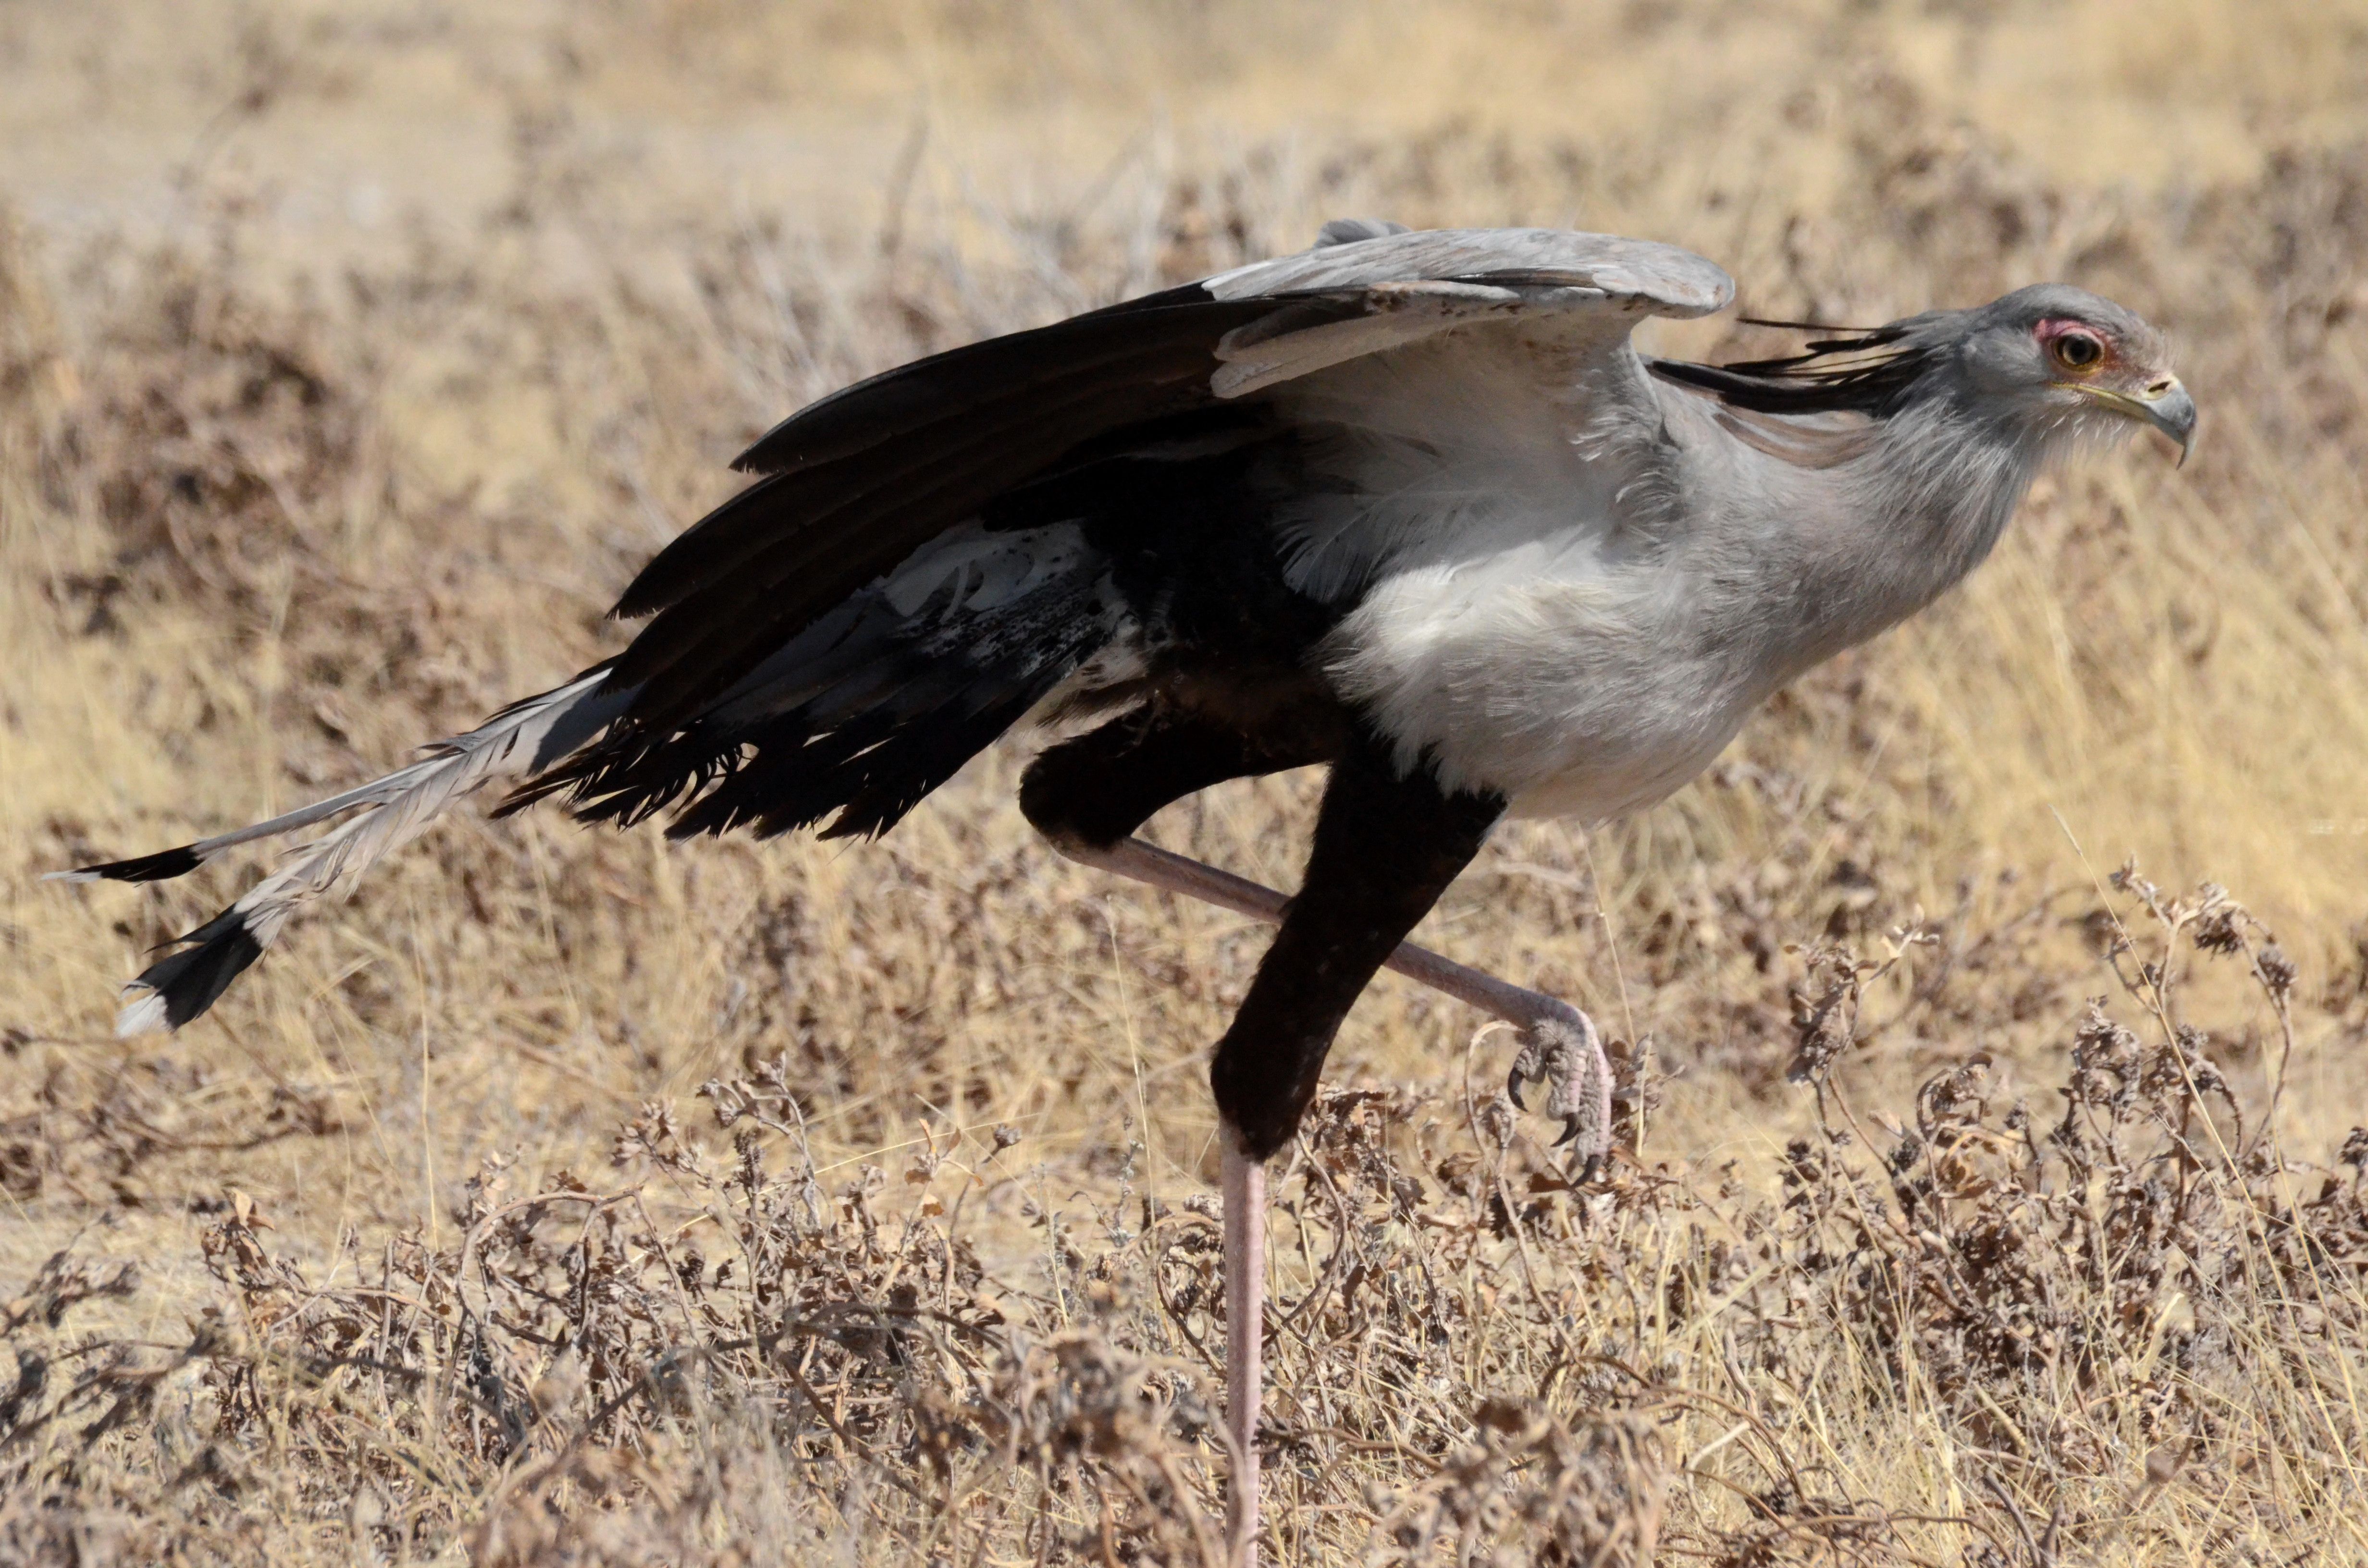 Click picture to see more SSecretarybirds.